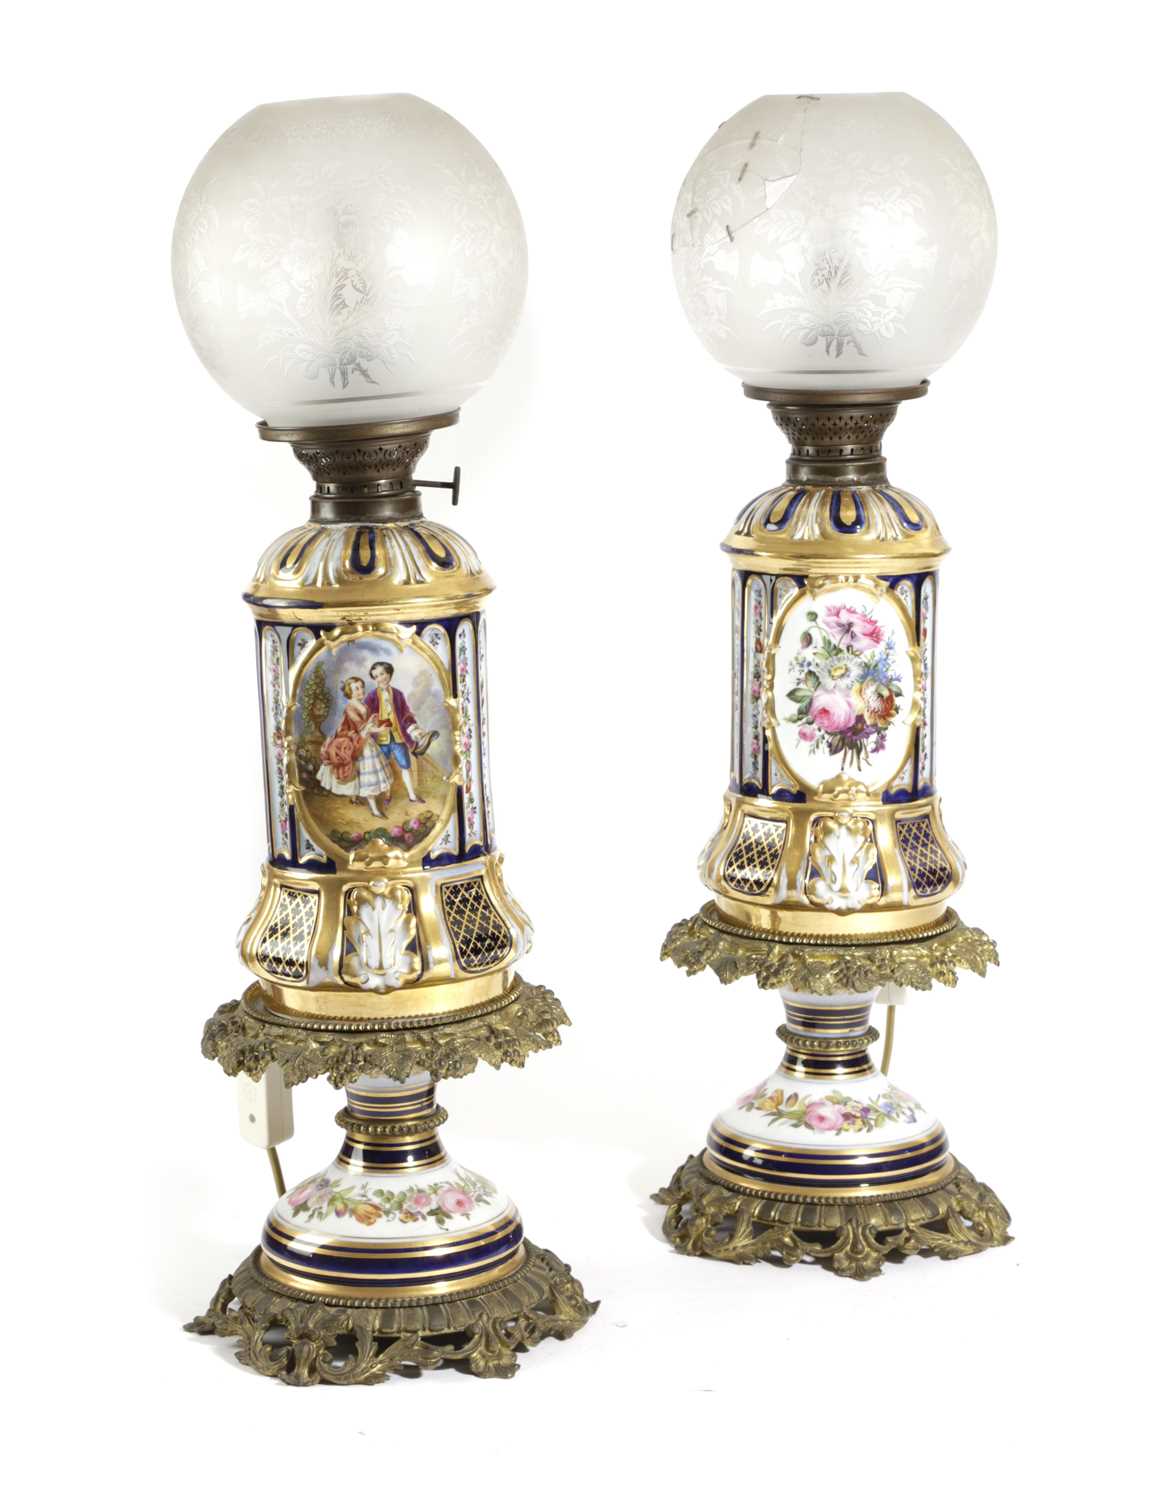 A PAIR OF FRENCH PORCELAIN AND GILT METAL OIL LAMPS LATE 19TH CENTURY each with a fluted body with